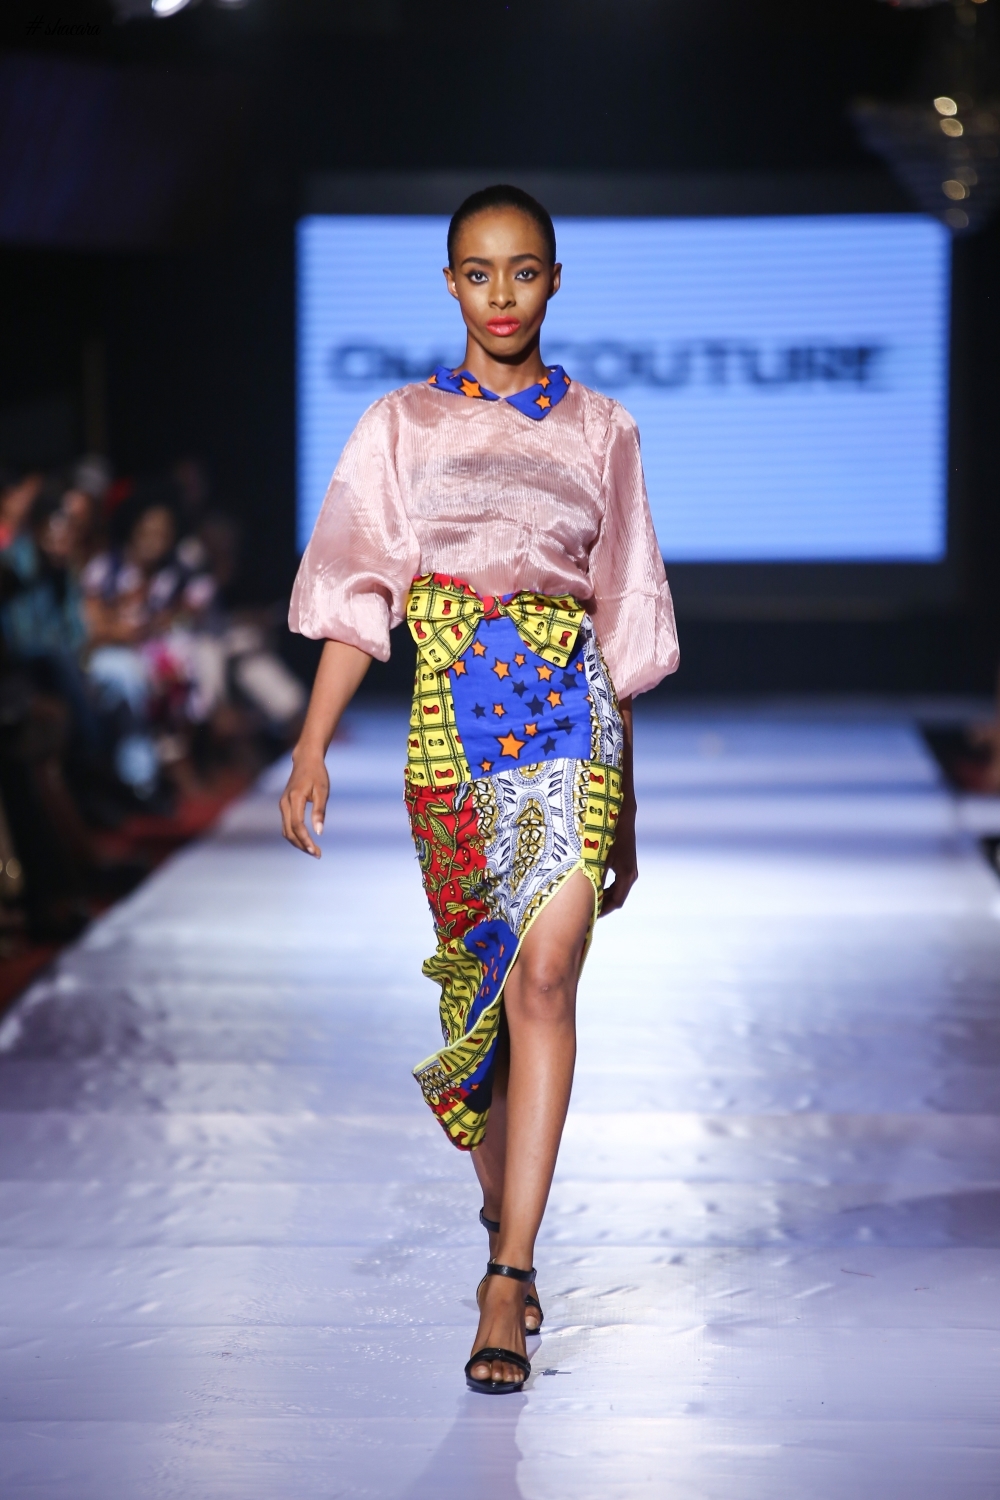 #AFWN17! Africa Fashion Week Nigeria Day 1: Oma Couture